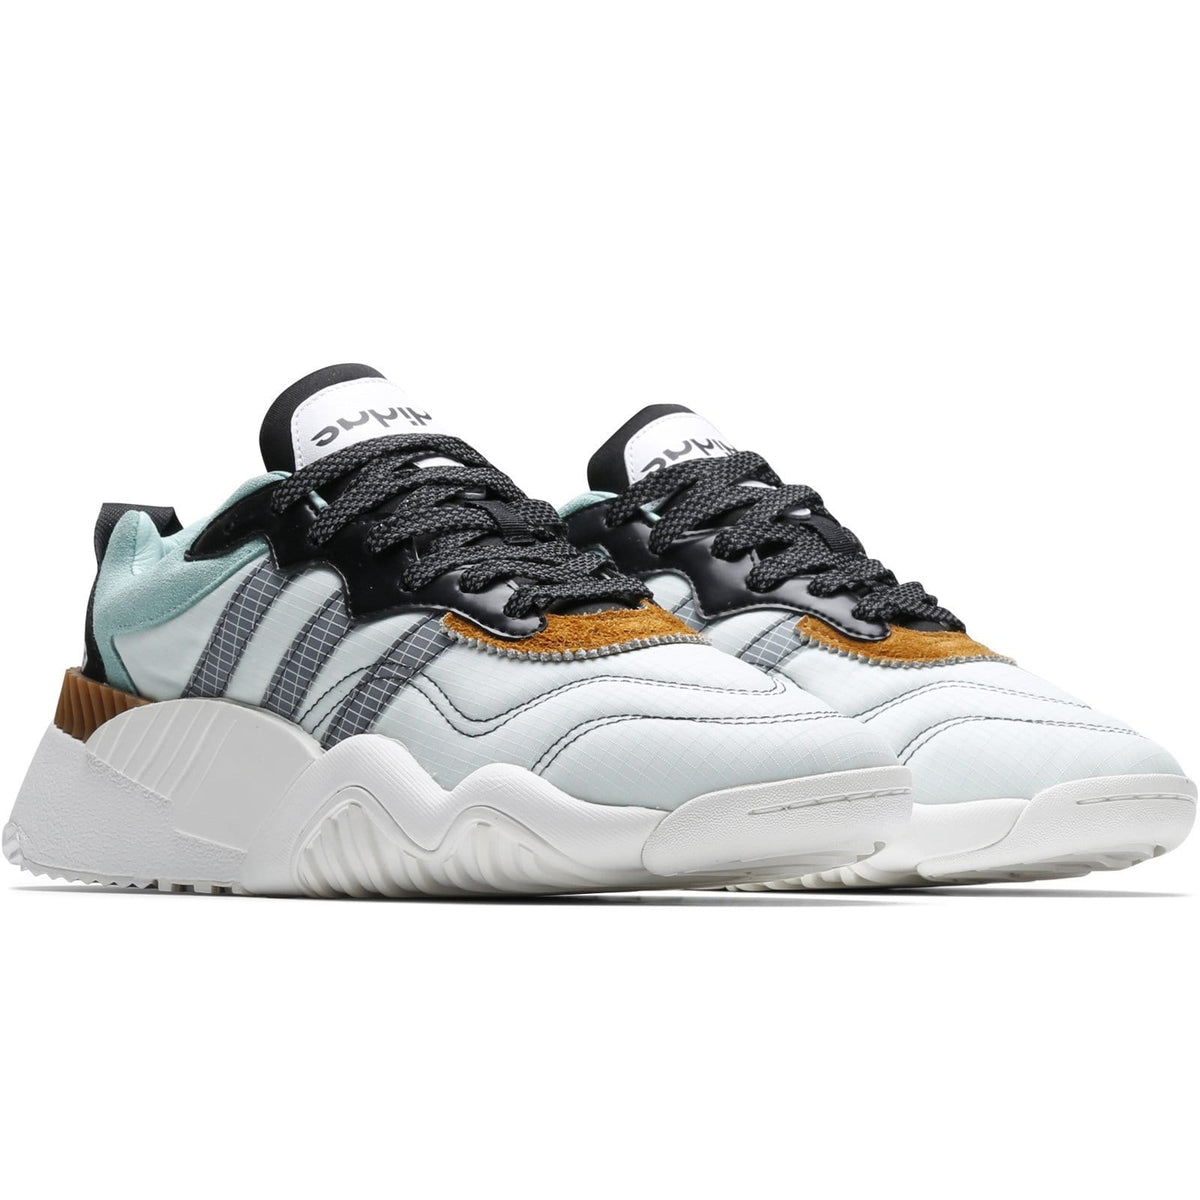 alexander wang x adidas aw turnout trainer